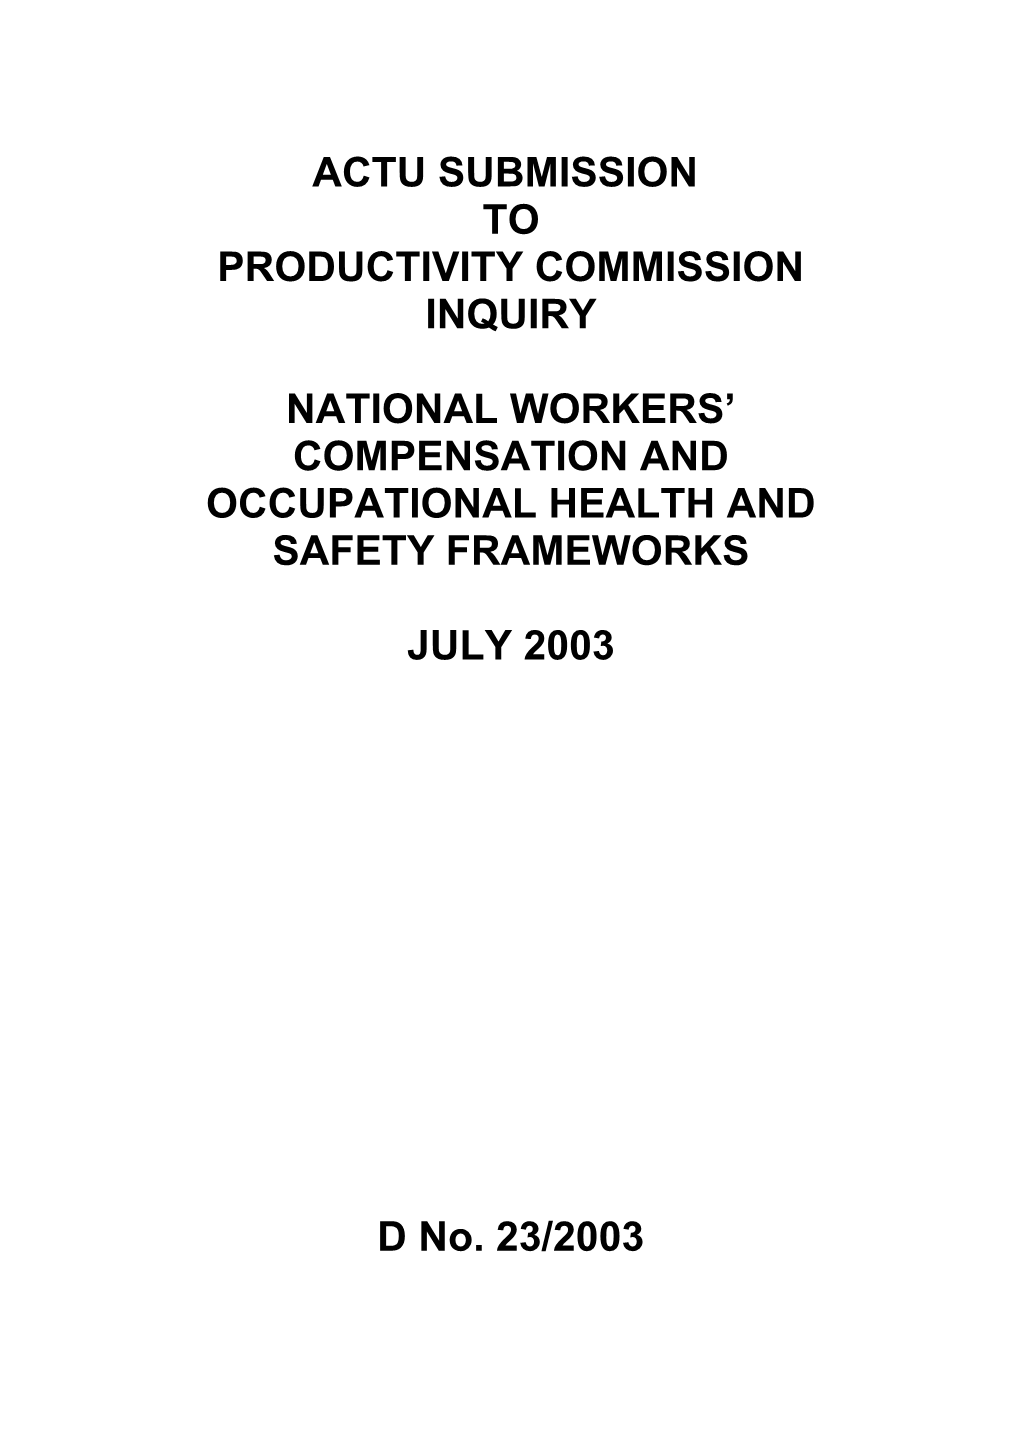 ACTU Submission to Productivity Inquiry National Workers' Compensation and Occupational